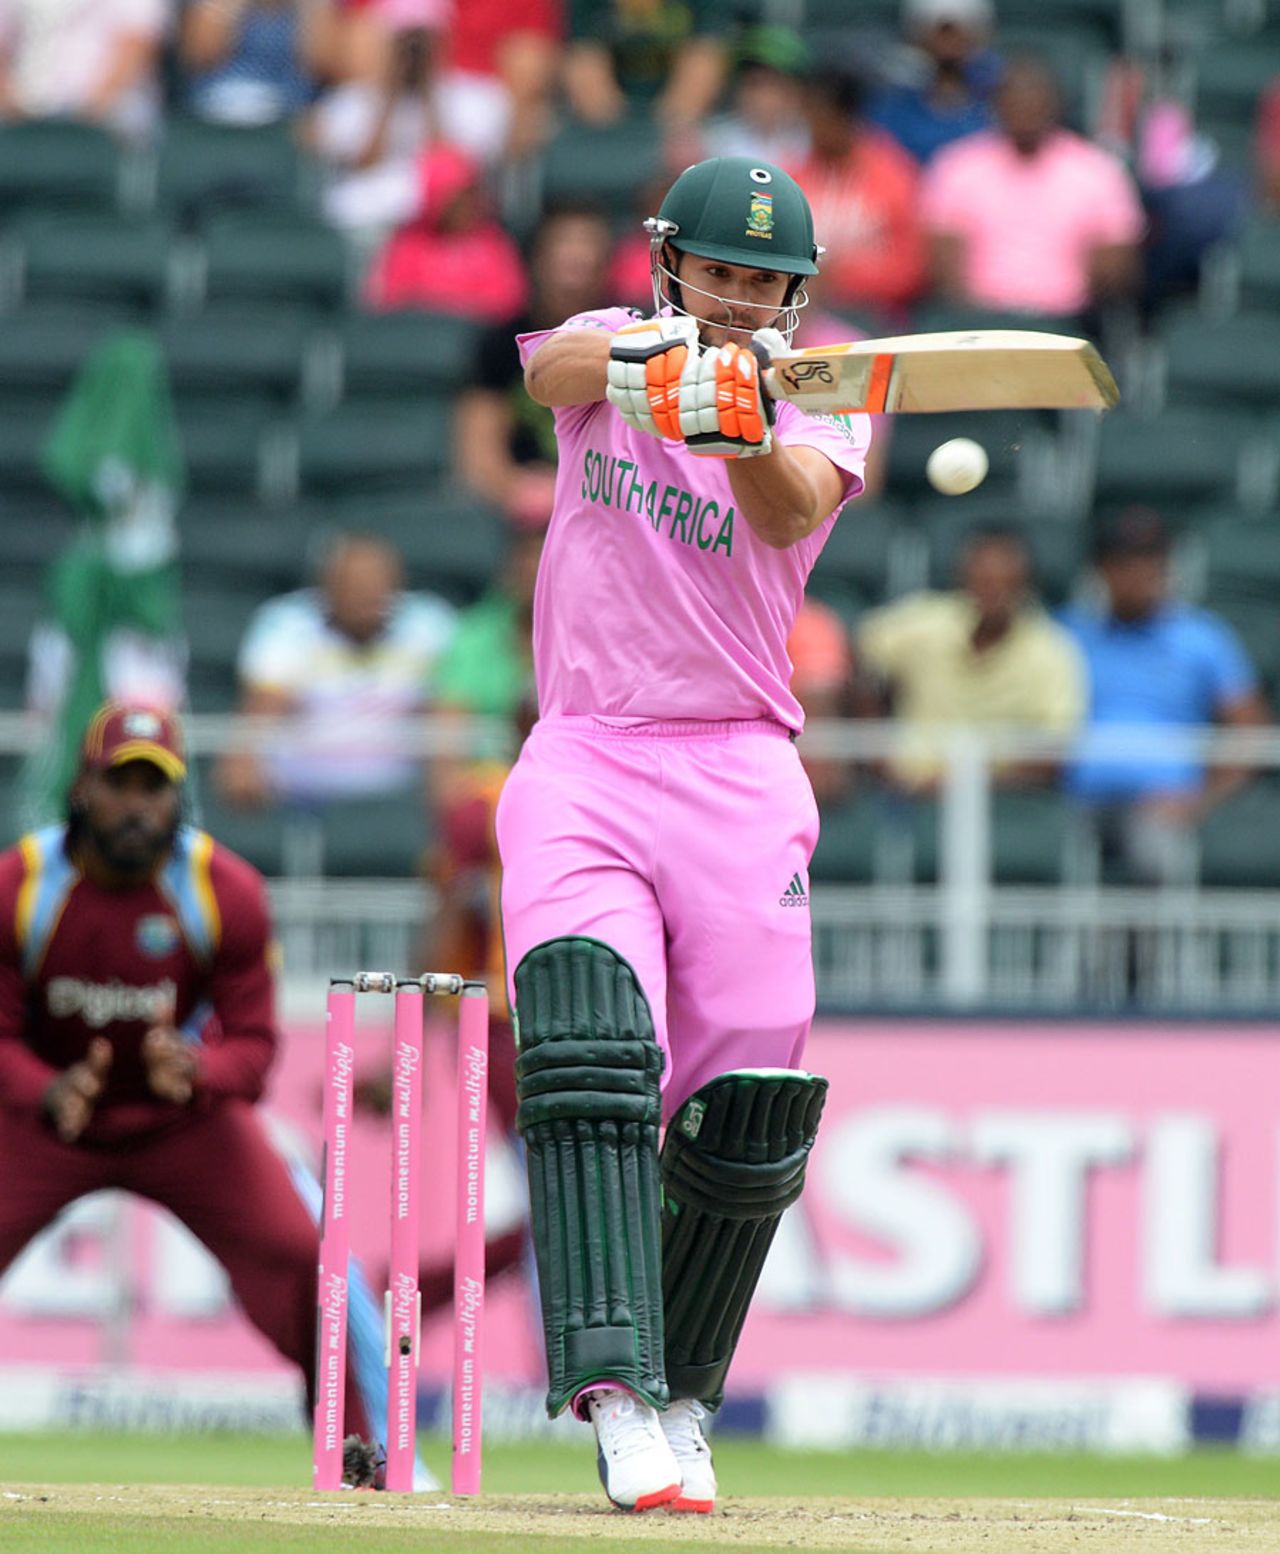 Rilee Rossouw grew in confidence as his innings progressed, South Africa v West Indies, 2nd ODI, Johannesburg, January 18, 2015